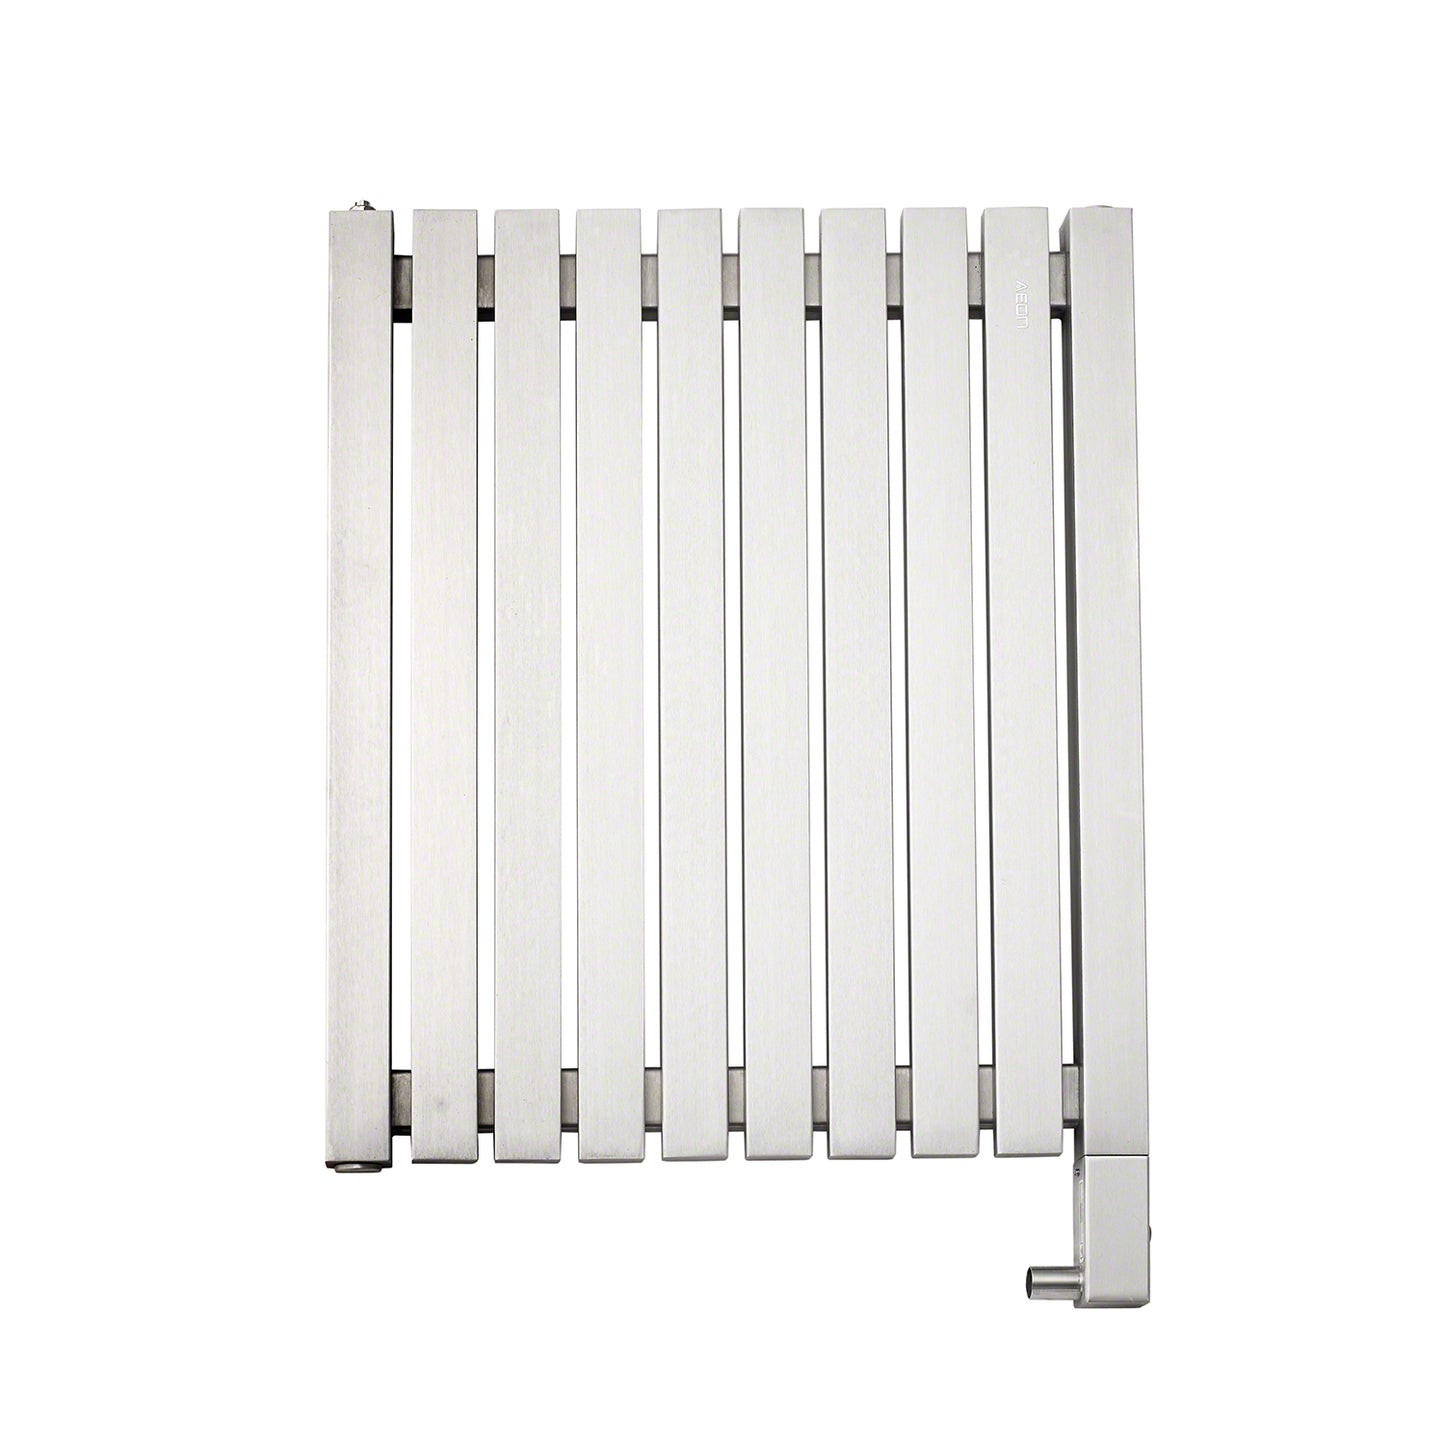 WX24 10-Bar Wall Mounted Electric Towel Warmer with Digital Timer in Stainless Steel Polished